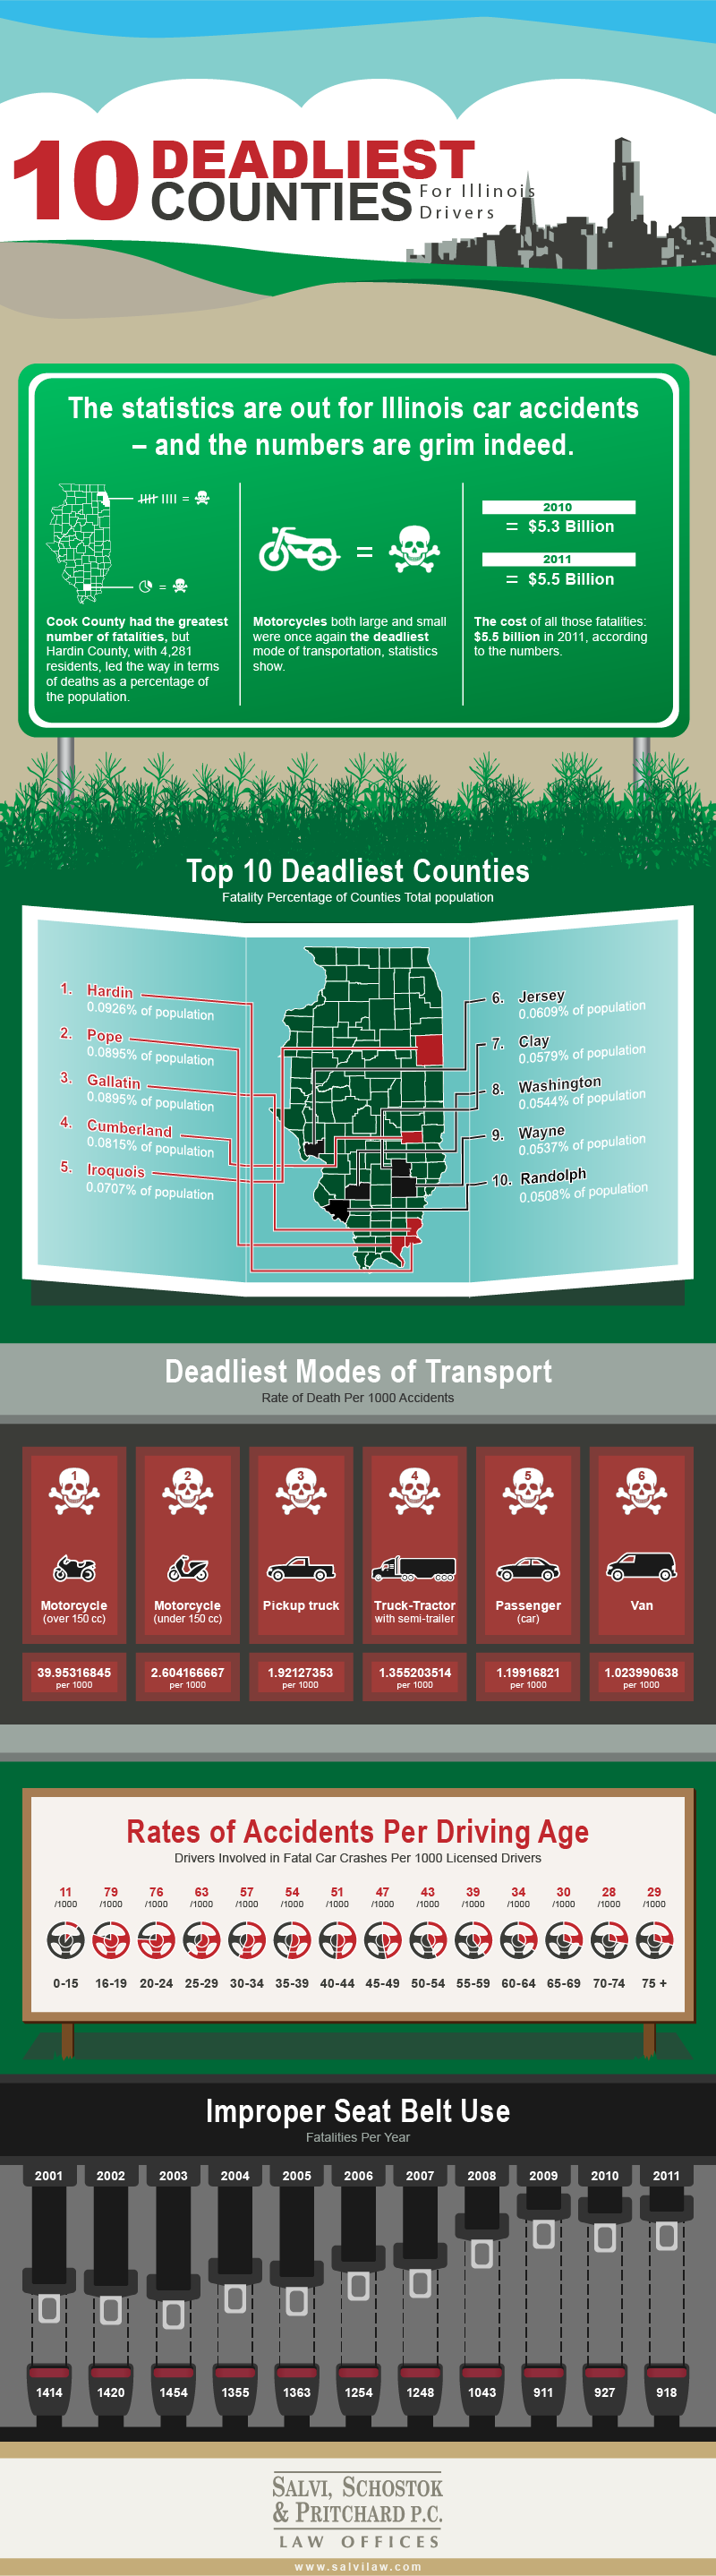 10 Deadliest Counties for Illinois Drivers Visual.ly